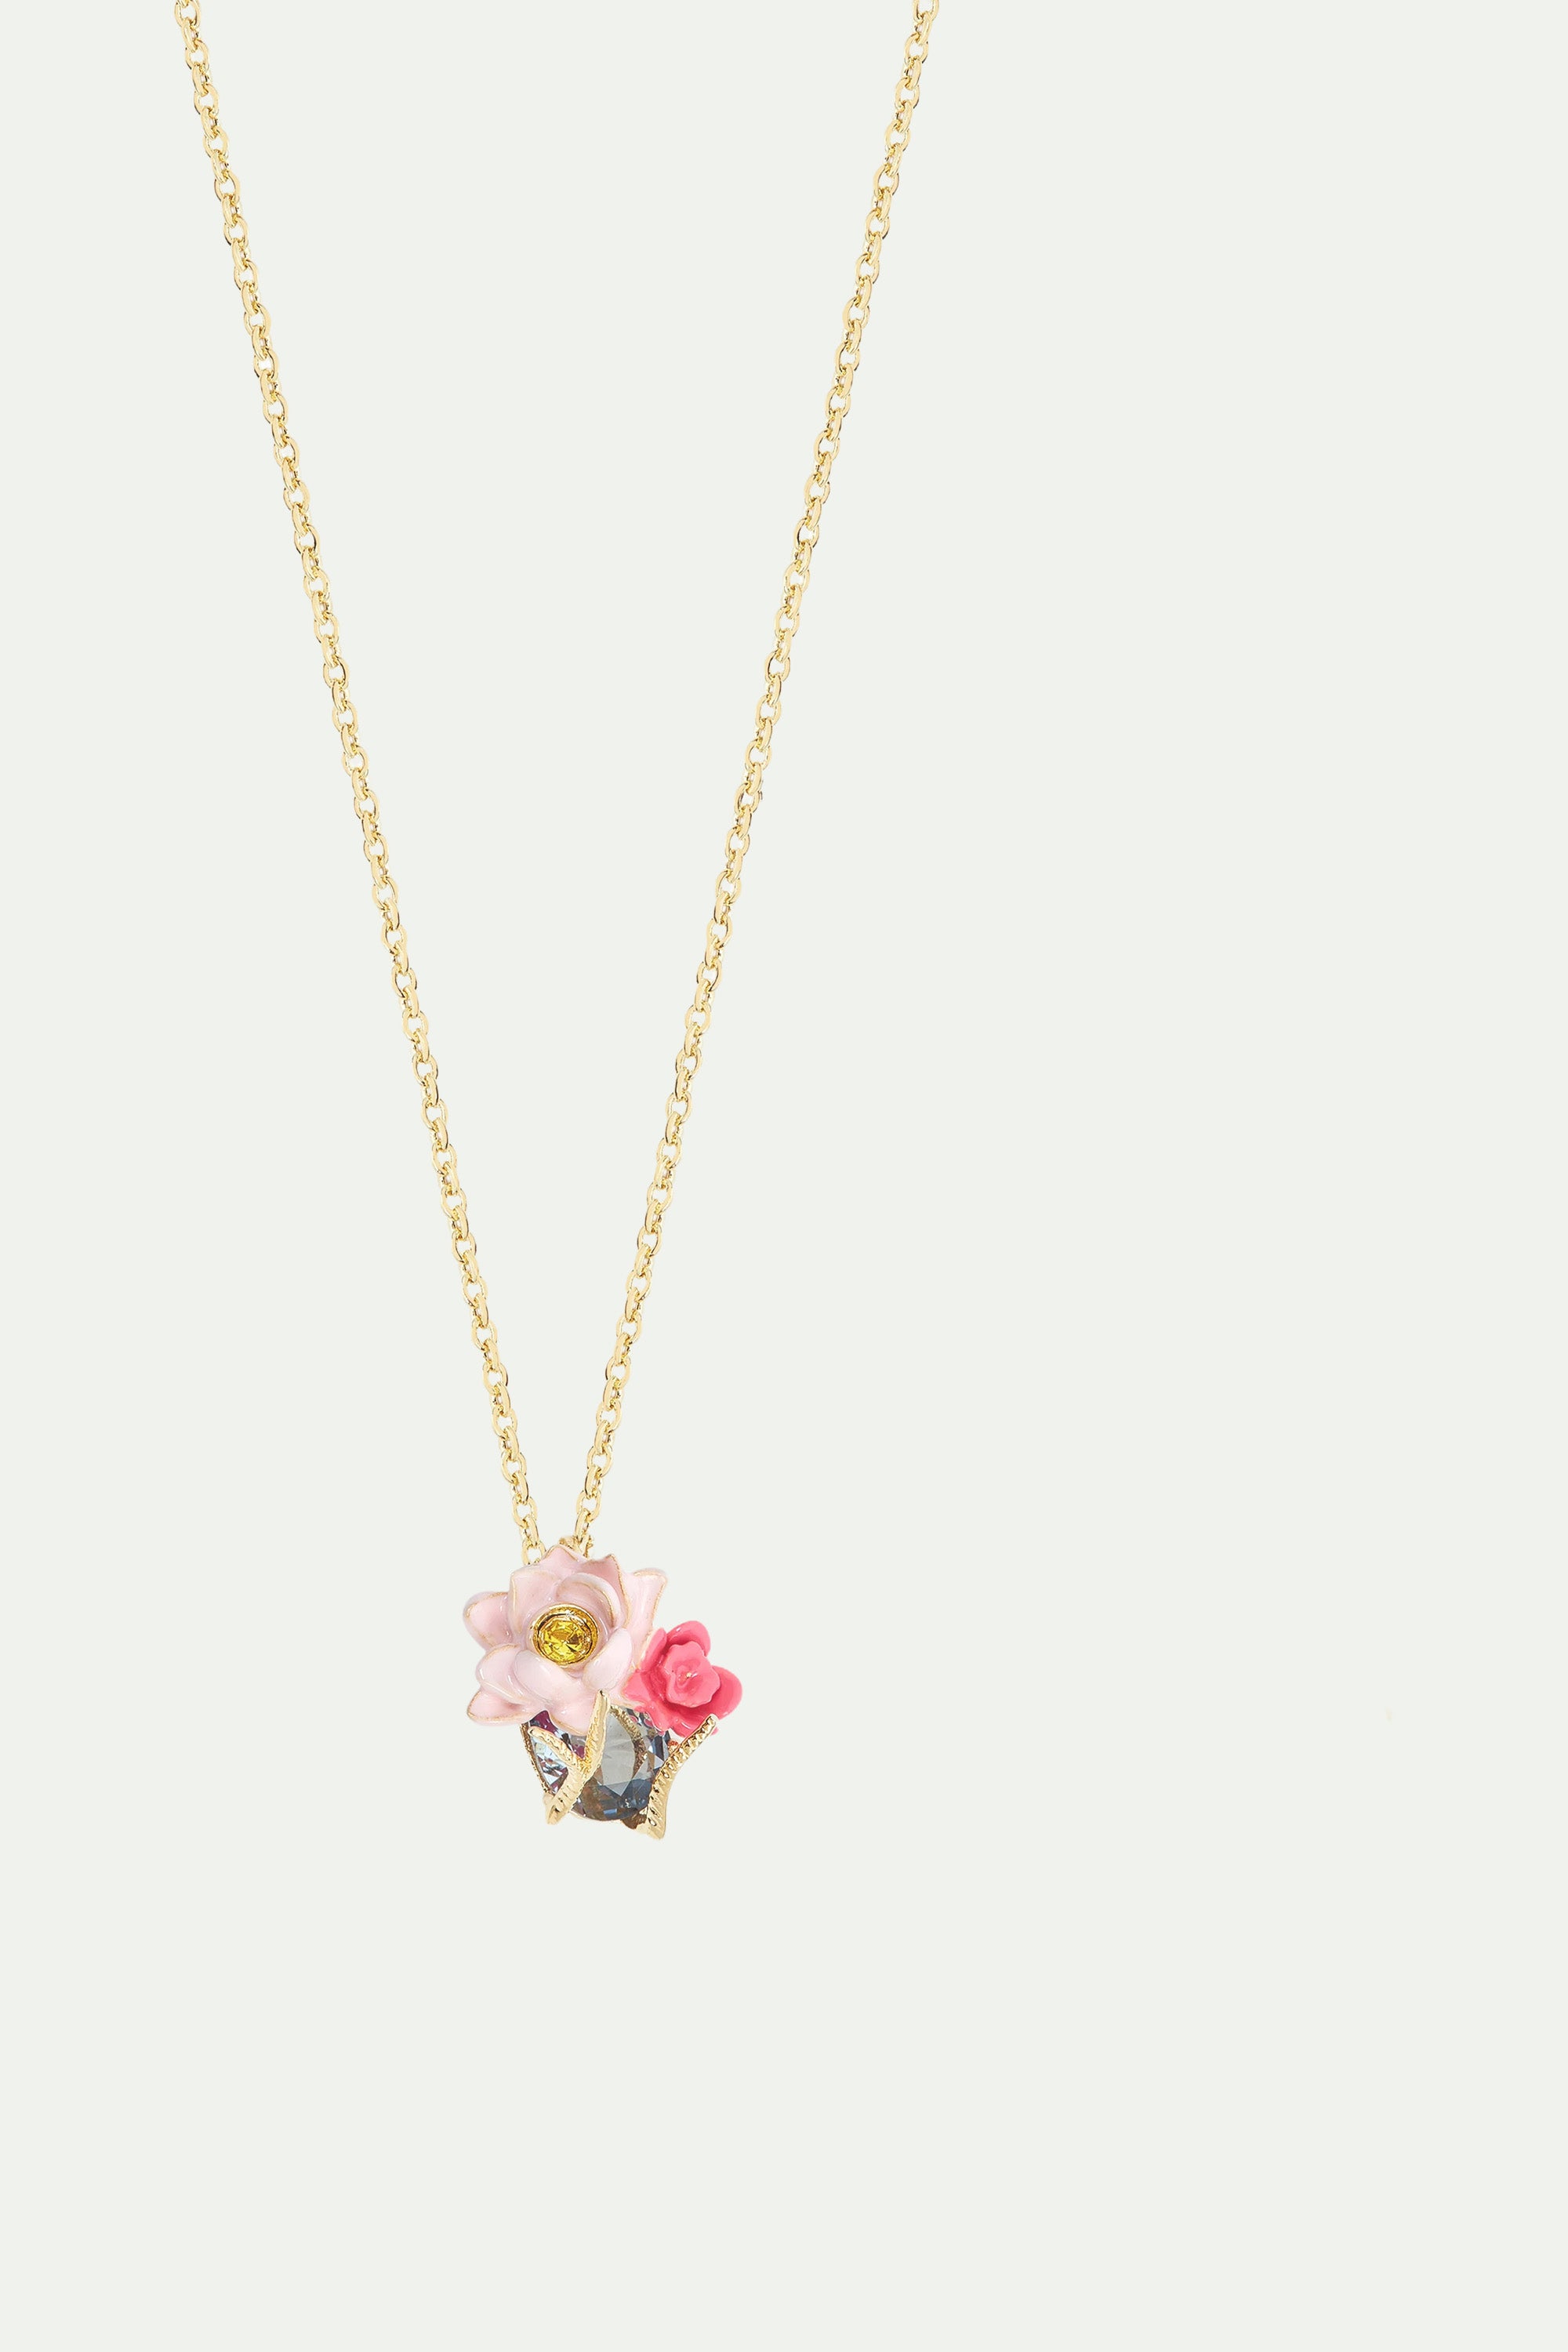 Pink lotus and light blue pendant necklace